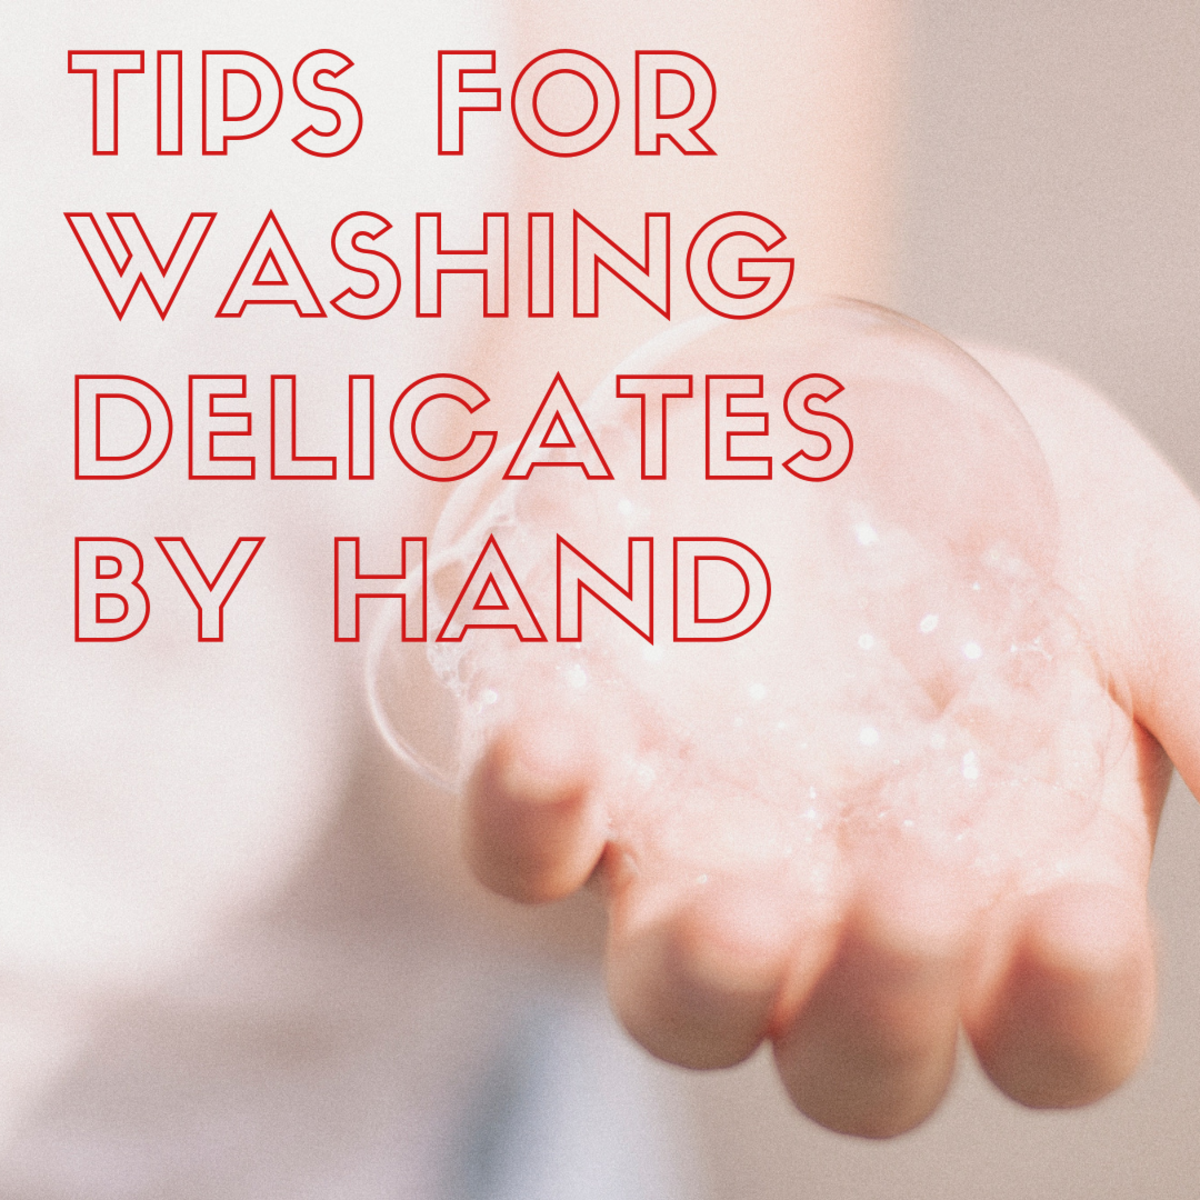 Tips for washing delicates by hand.